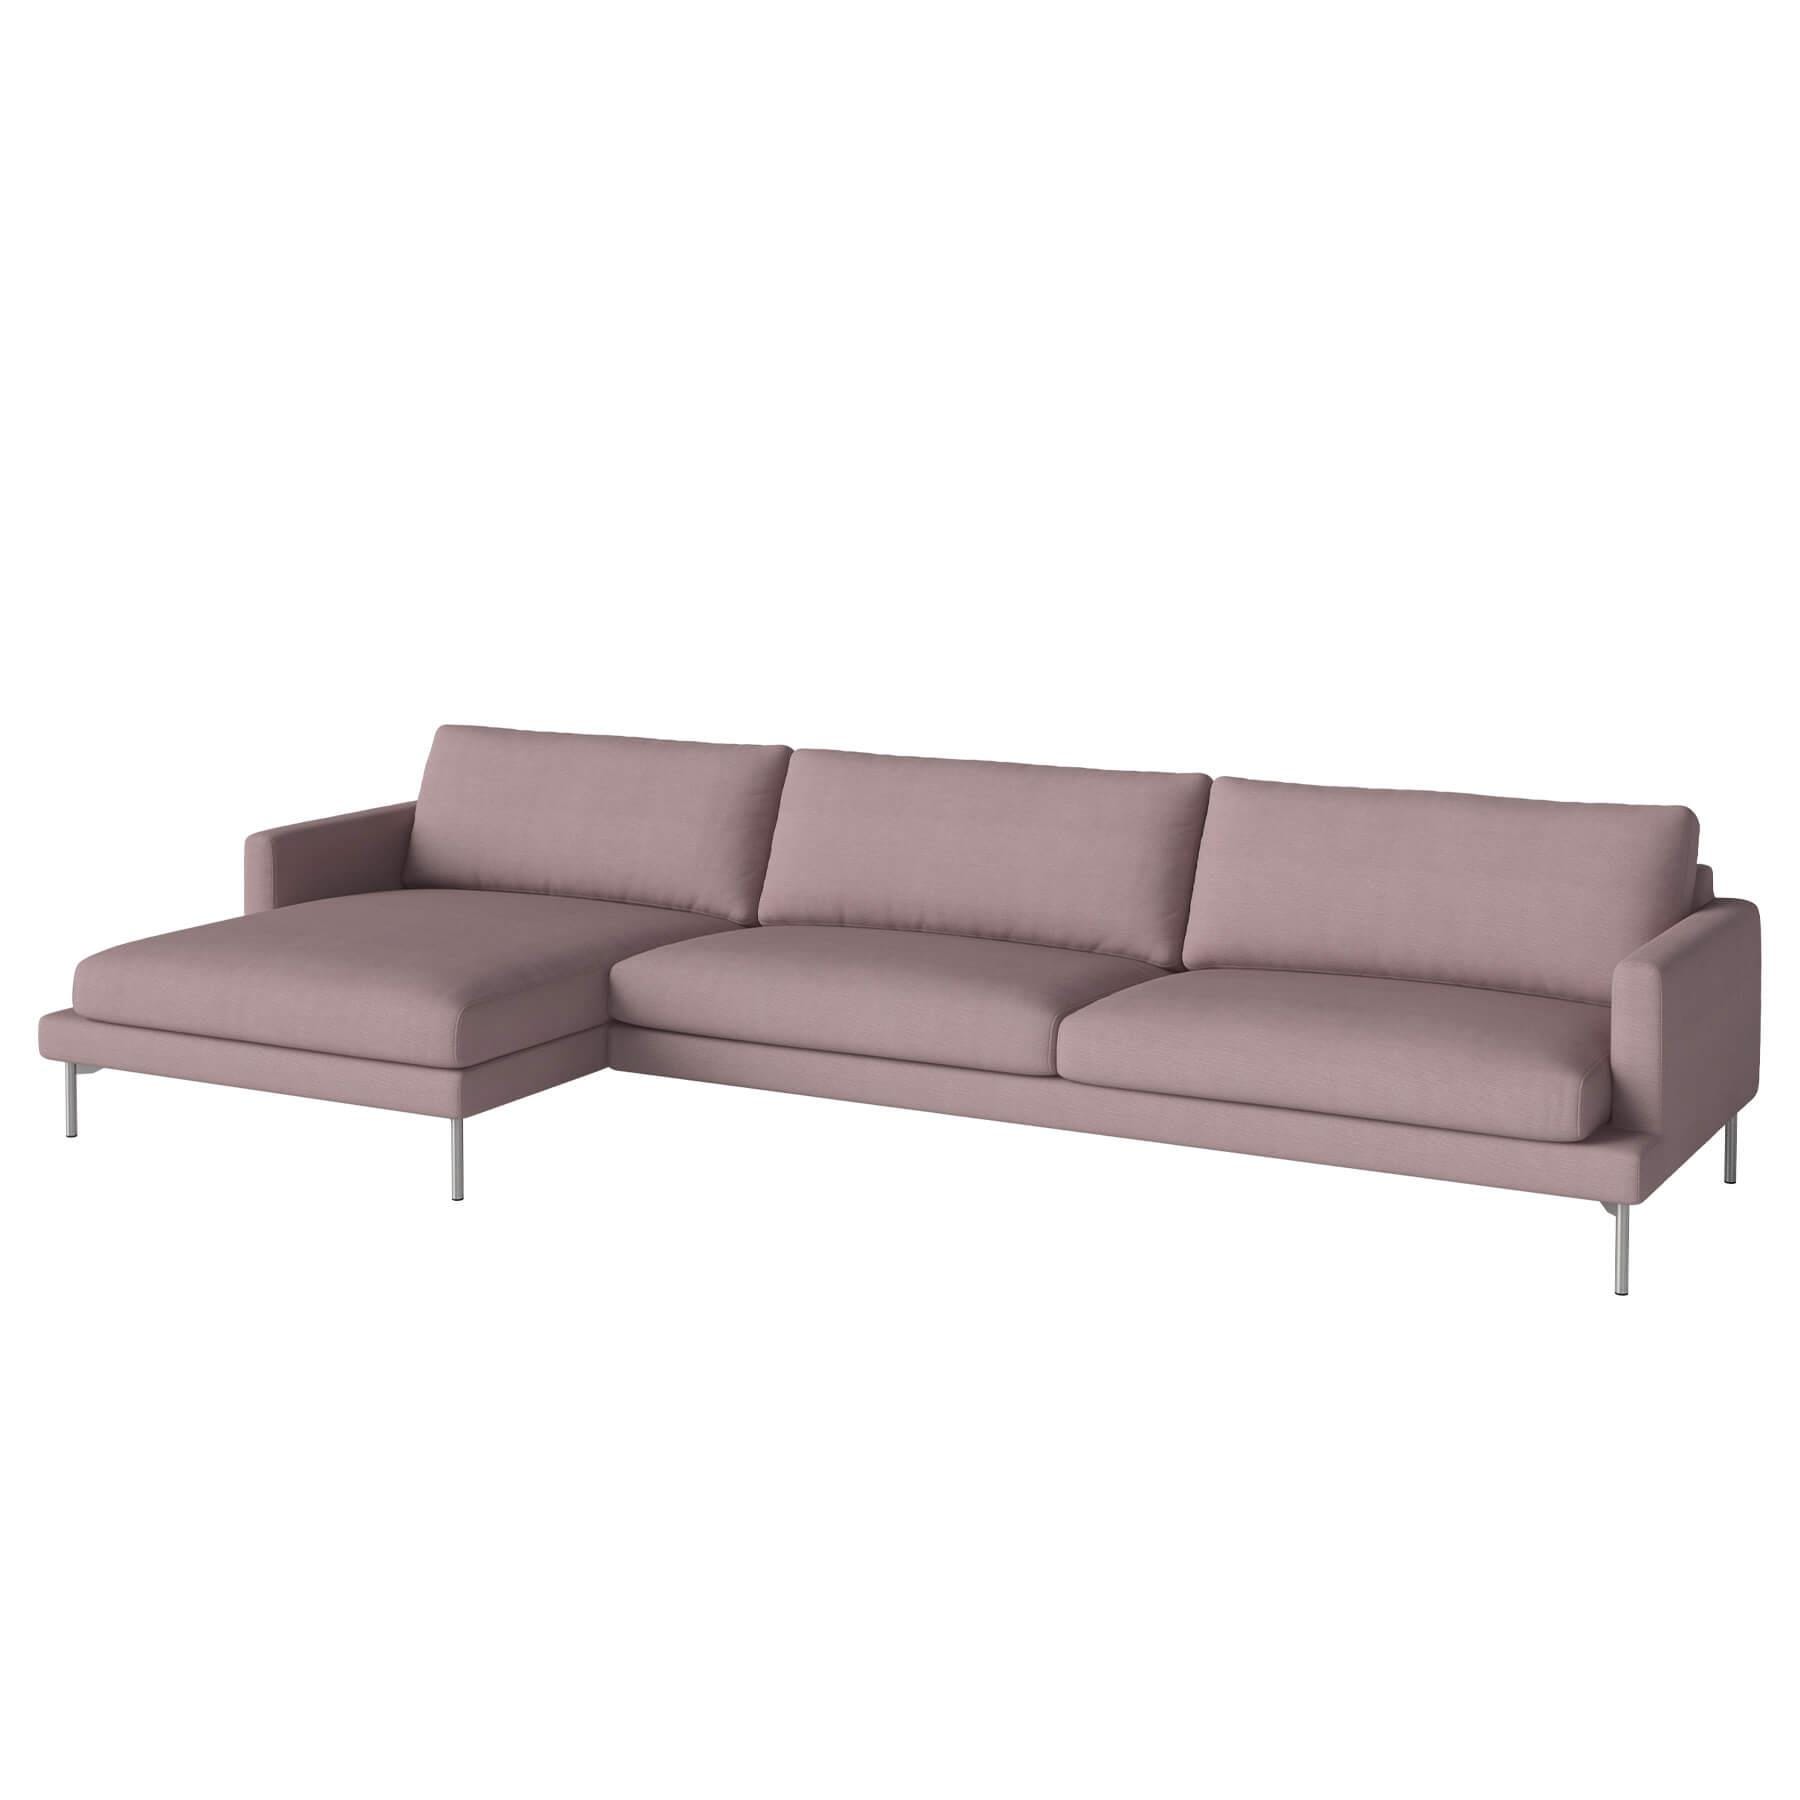 Bolia Veneda Sofa 45 Seater Sofa With Chaise Longue Brushed Steel Linea Rosa Left Pink Designer Furniture From Holloways Of Ludlow